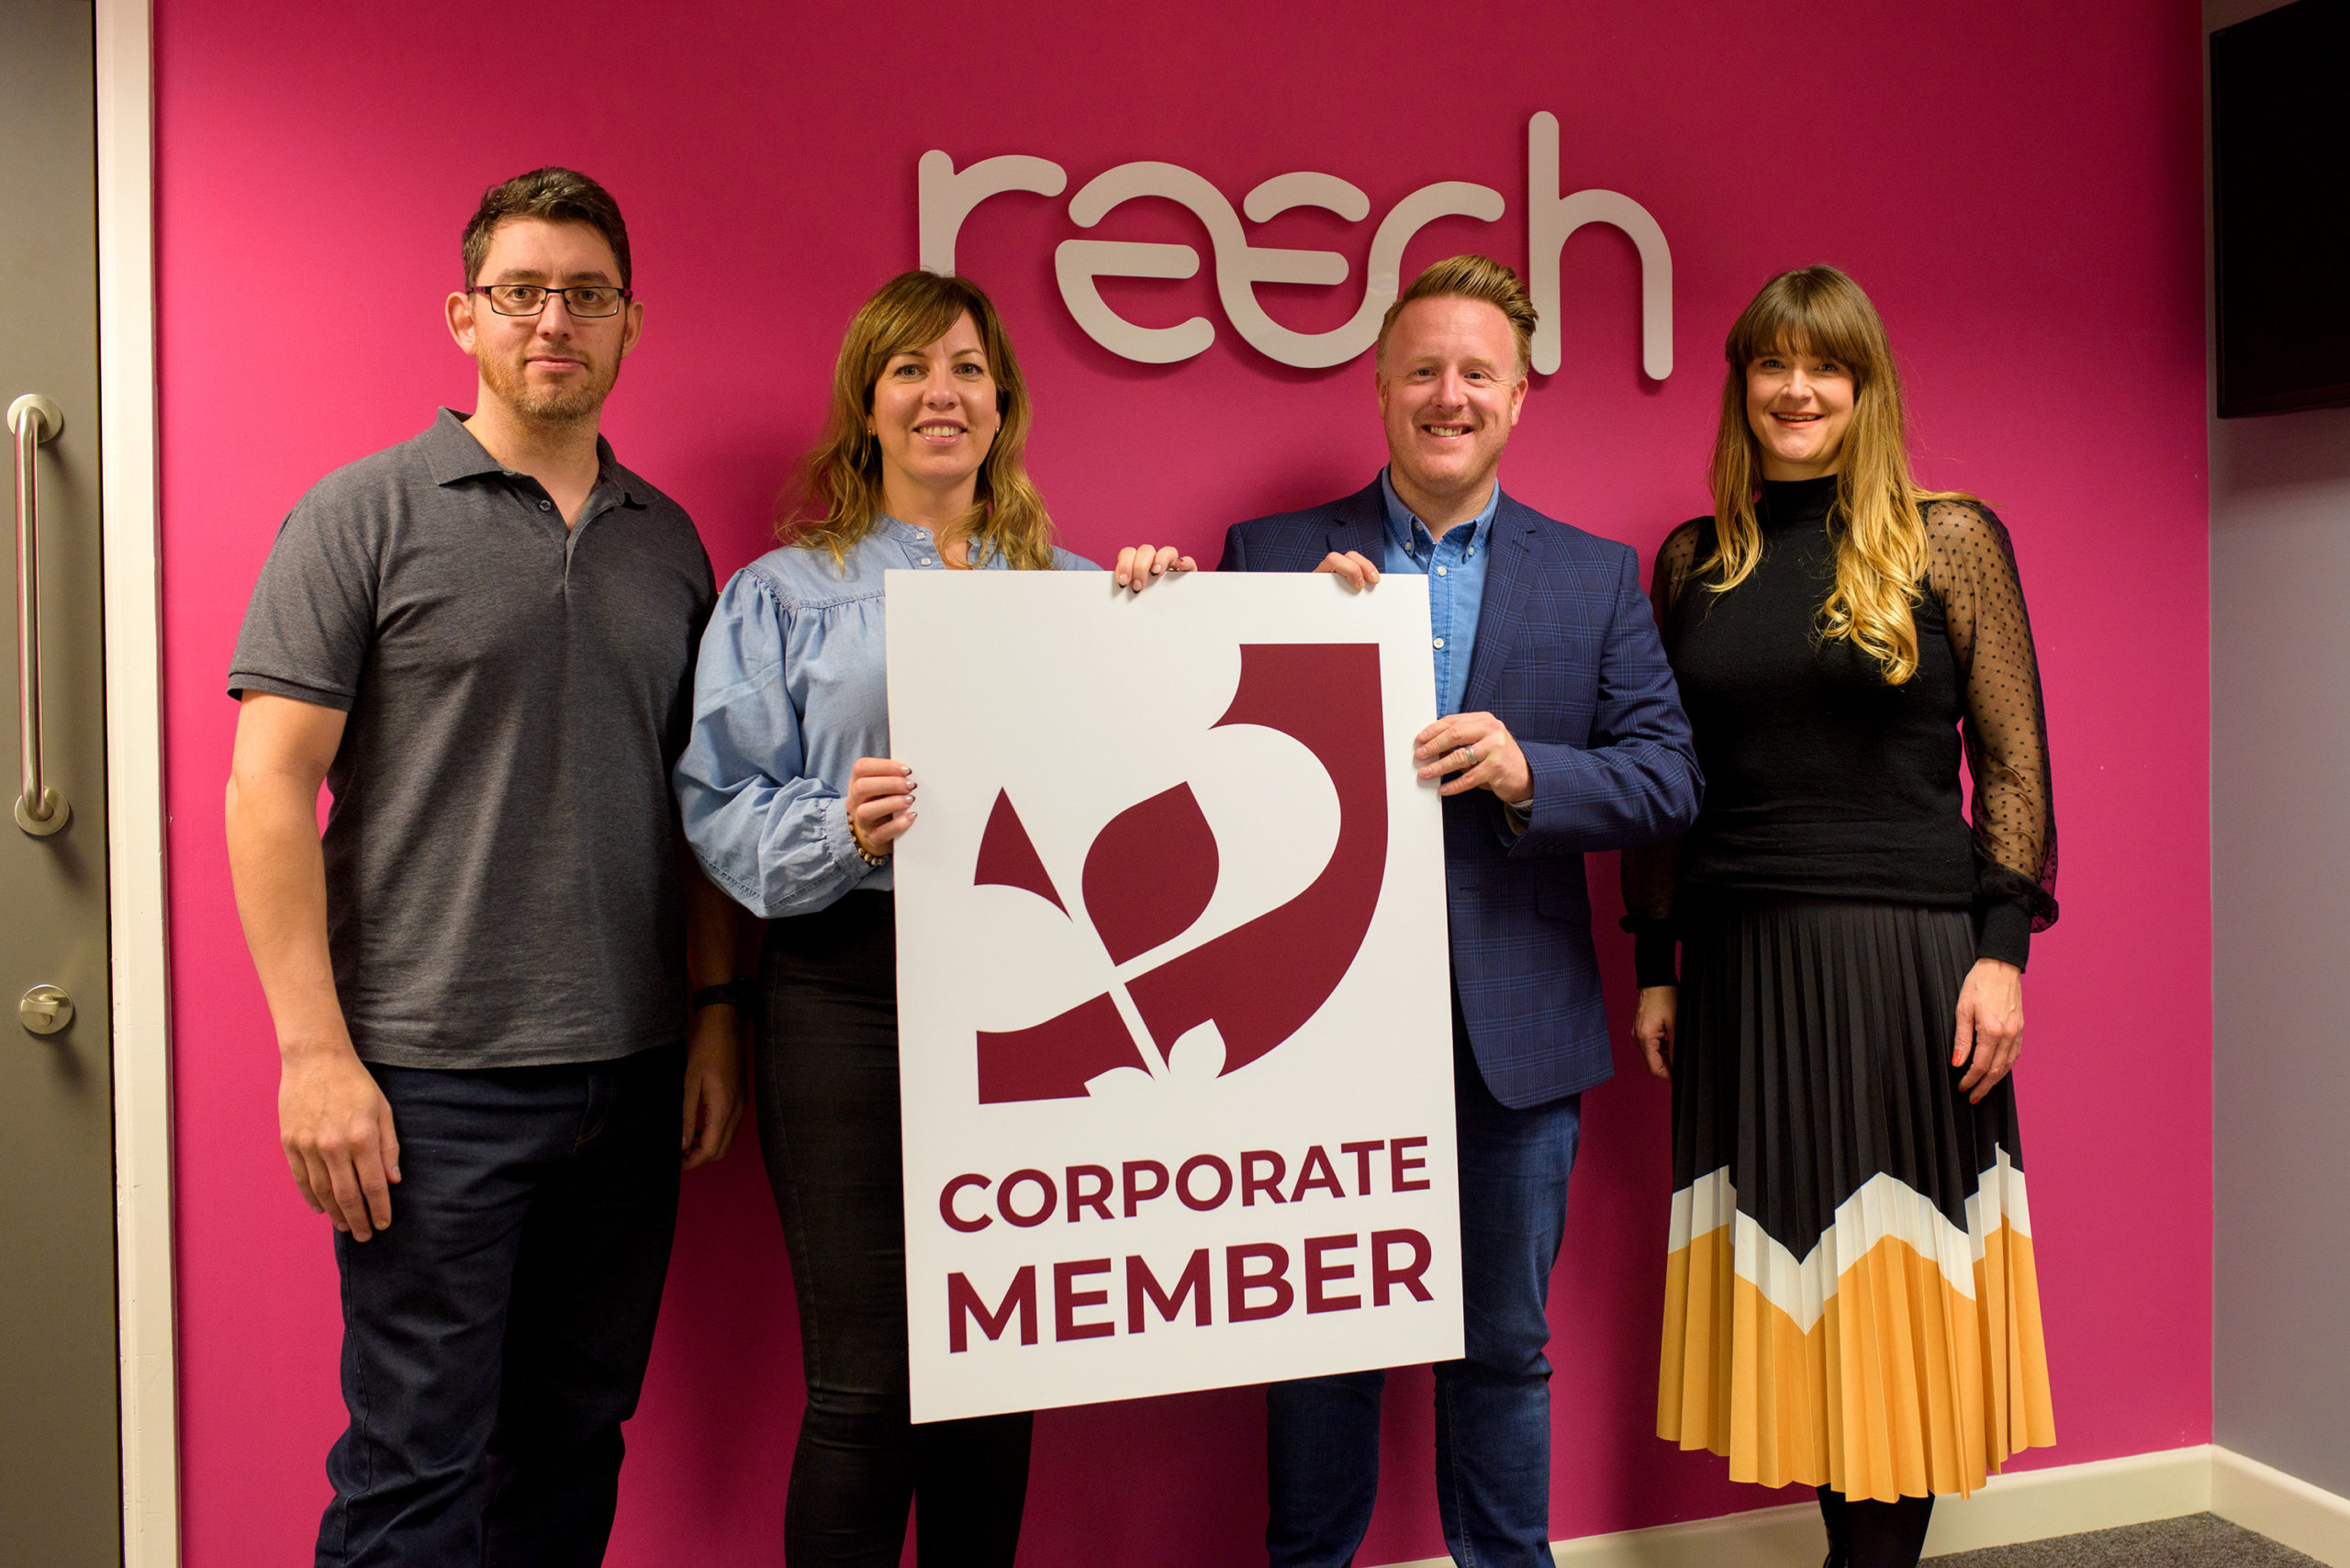 We’ve renewed our Corporate Membership at Shropshire Chamber of Commerce